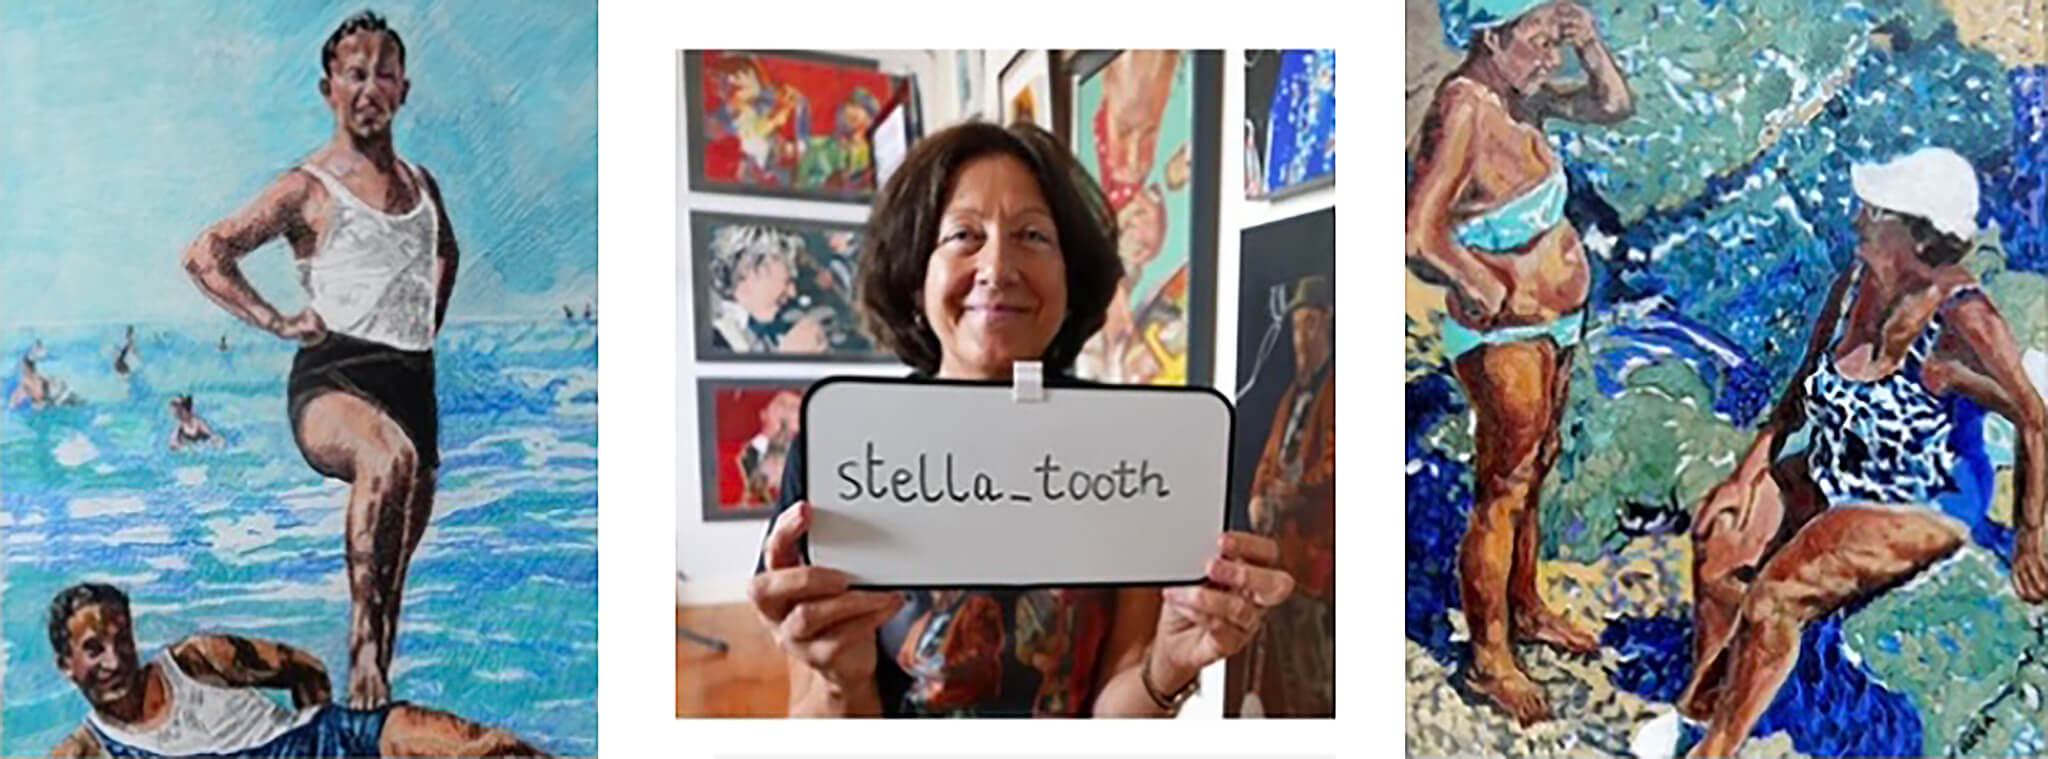 Stella Tooth artist with her performer and bather artworks